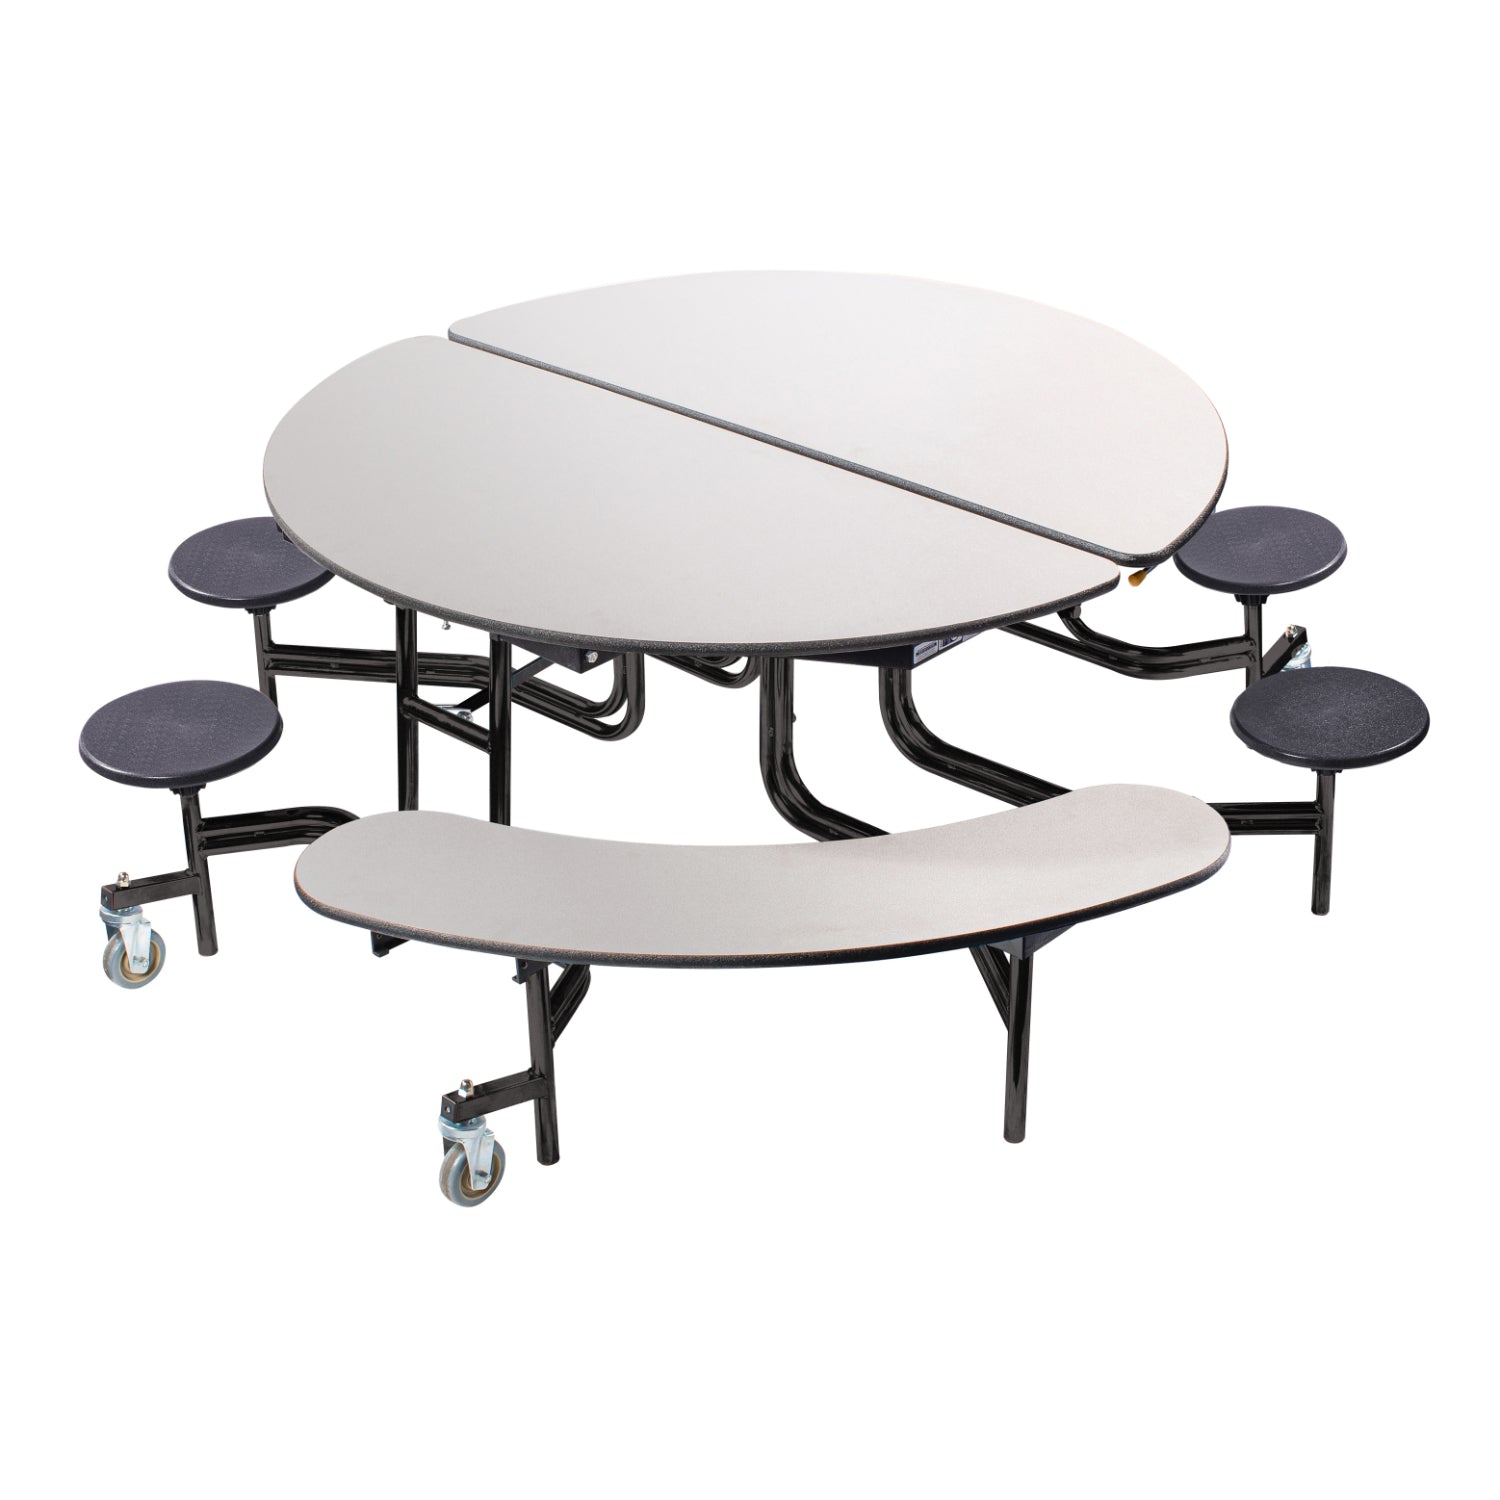 Mobile Combo Cafeteria Table, 60" Round with Stools and Benches, Plywood Core, Vinyl T-Mold Edge, Textured Black Frame